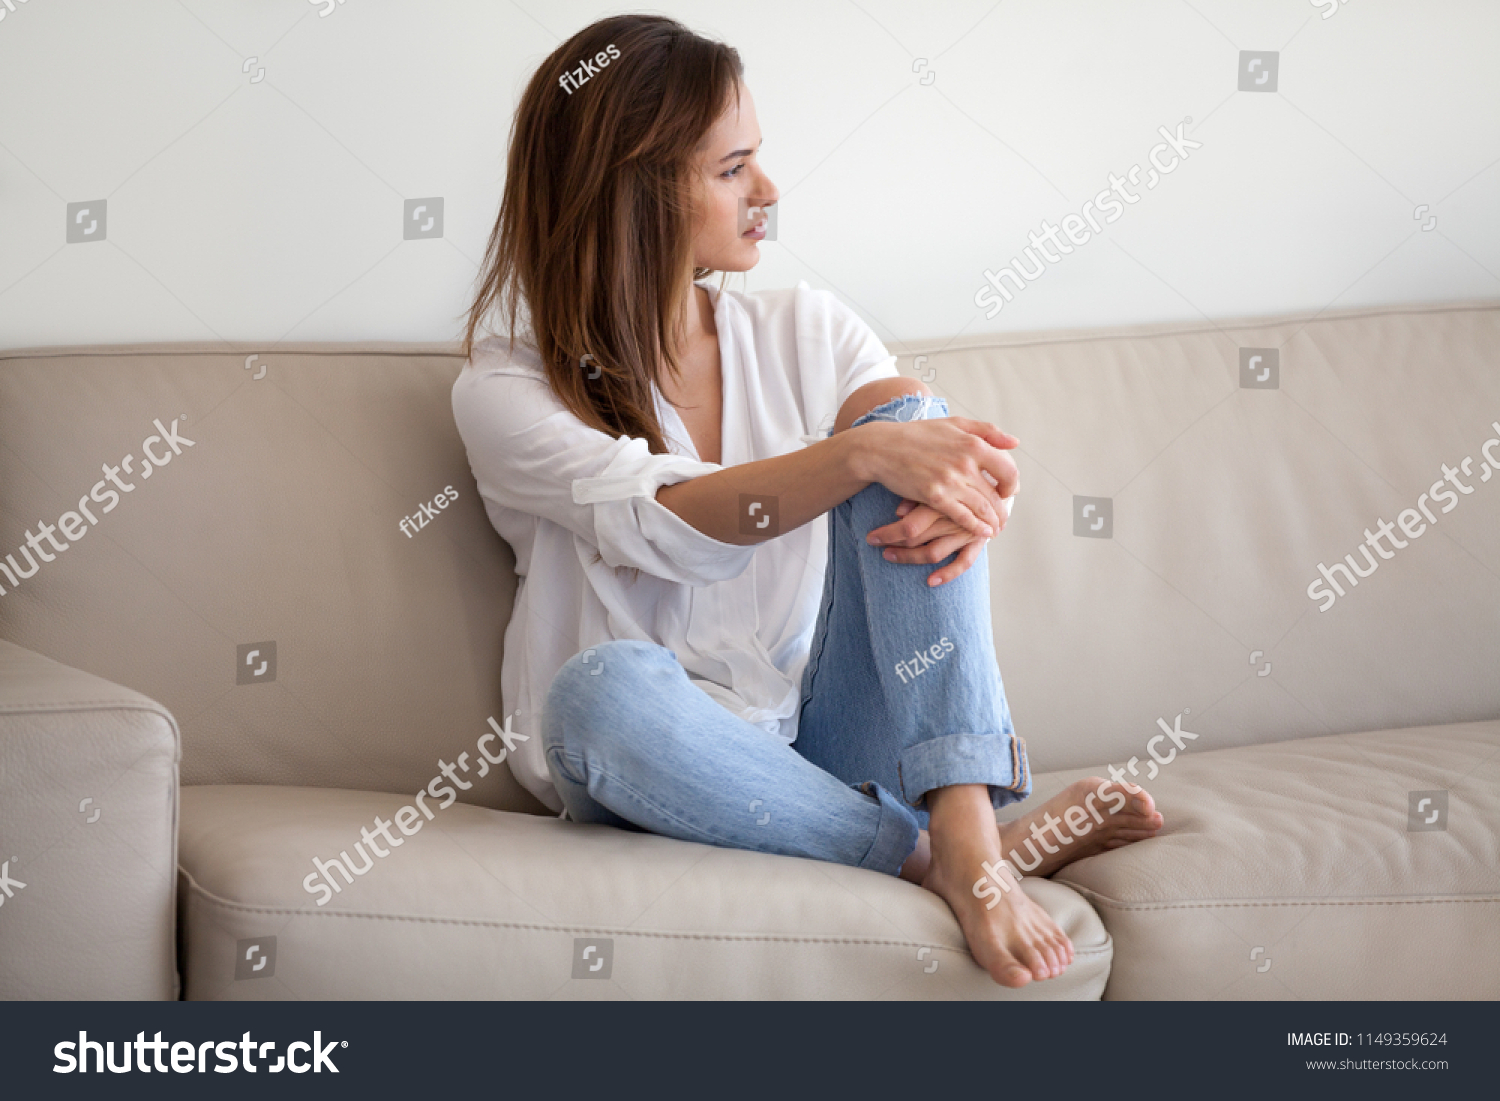 Sad millennial woman sit on couch looking far away, thinking about problems with boyfriend  #1149359624